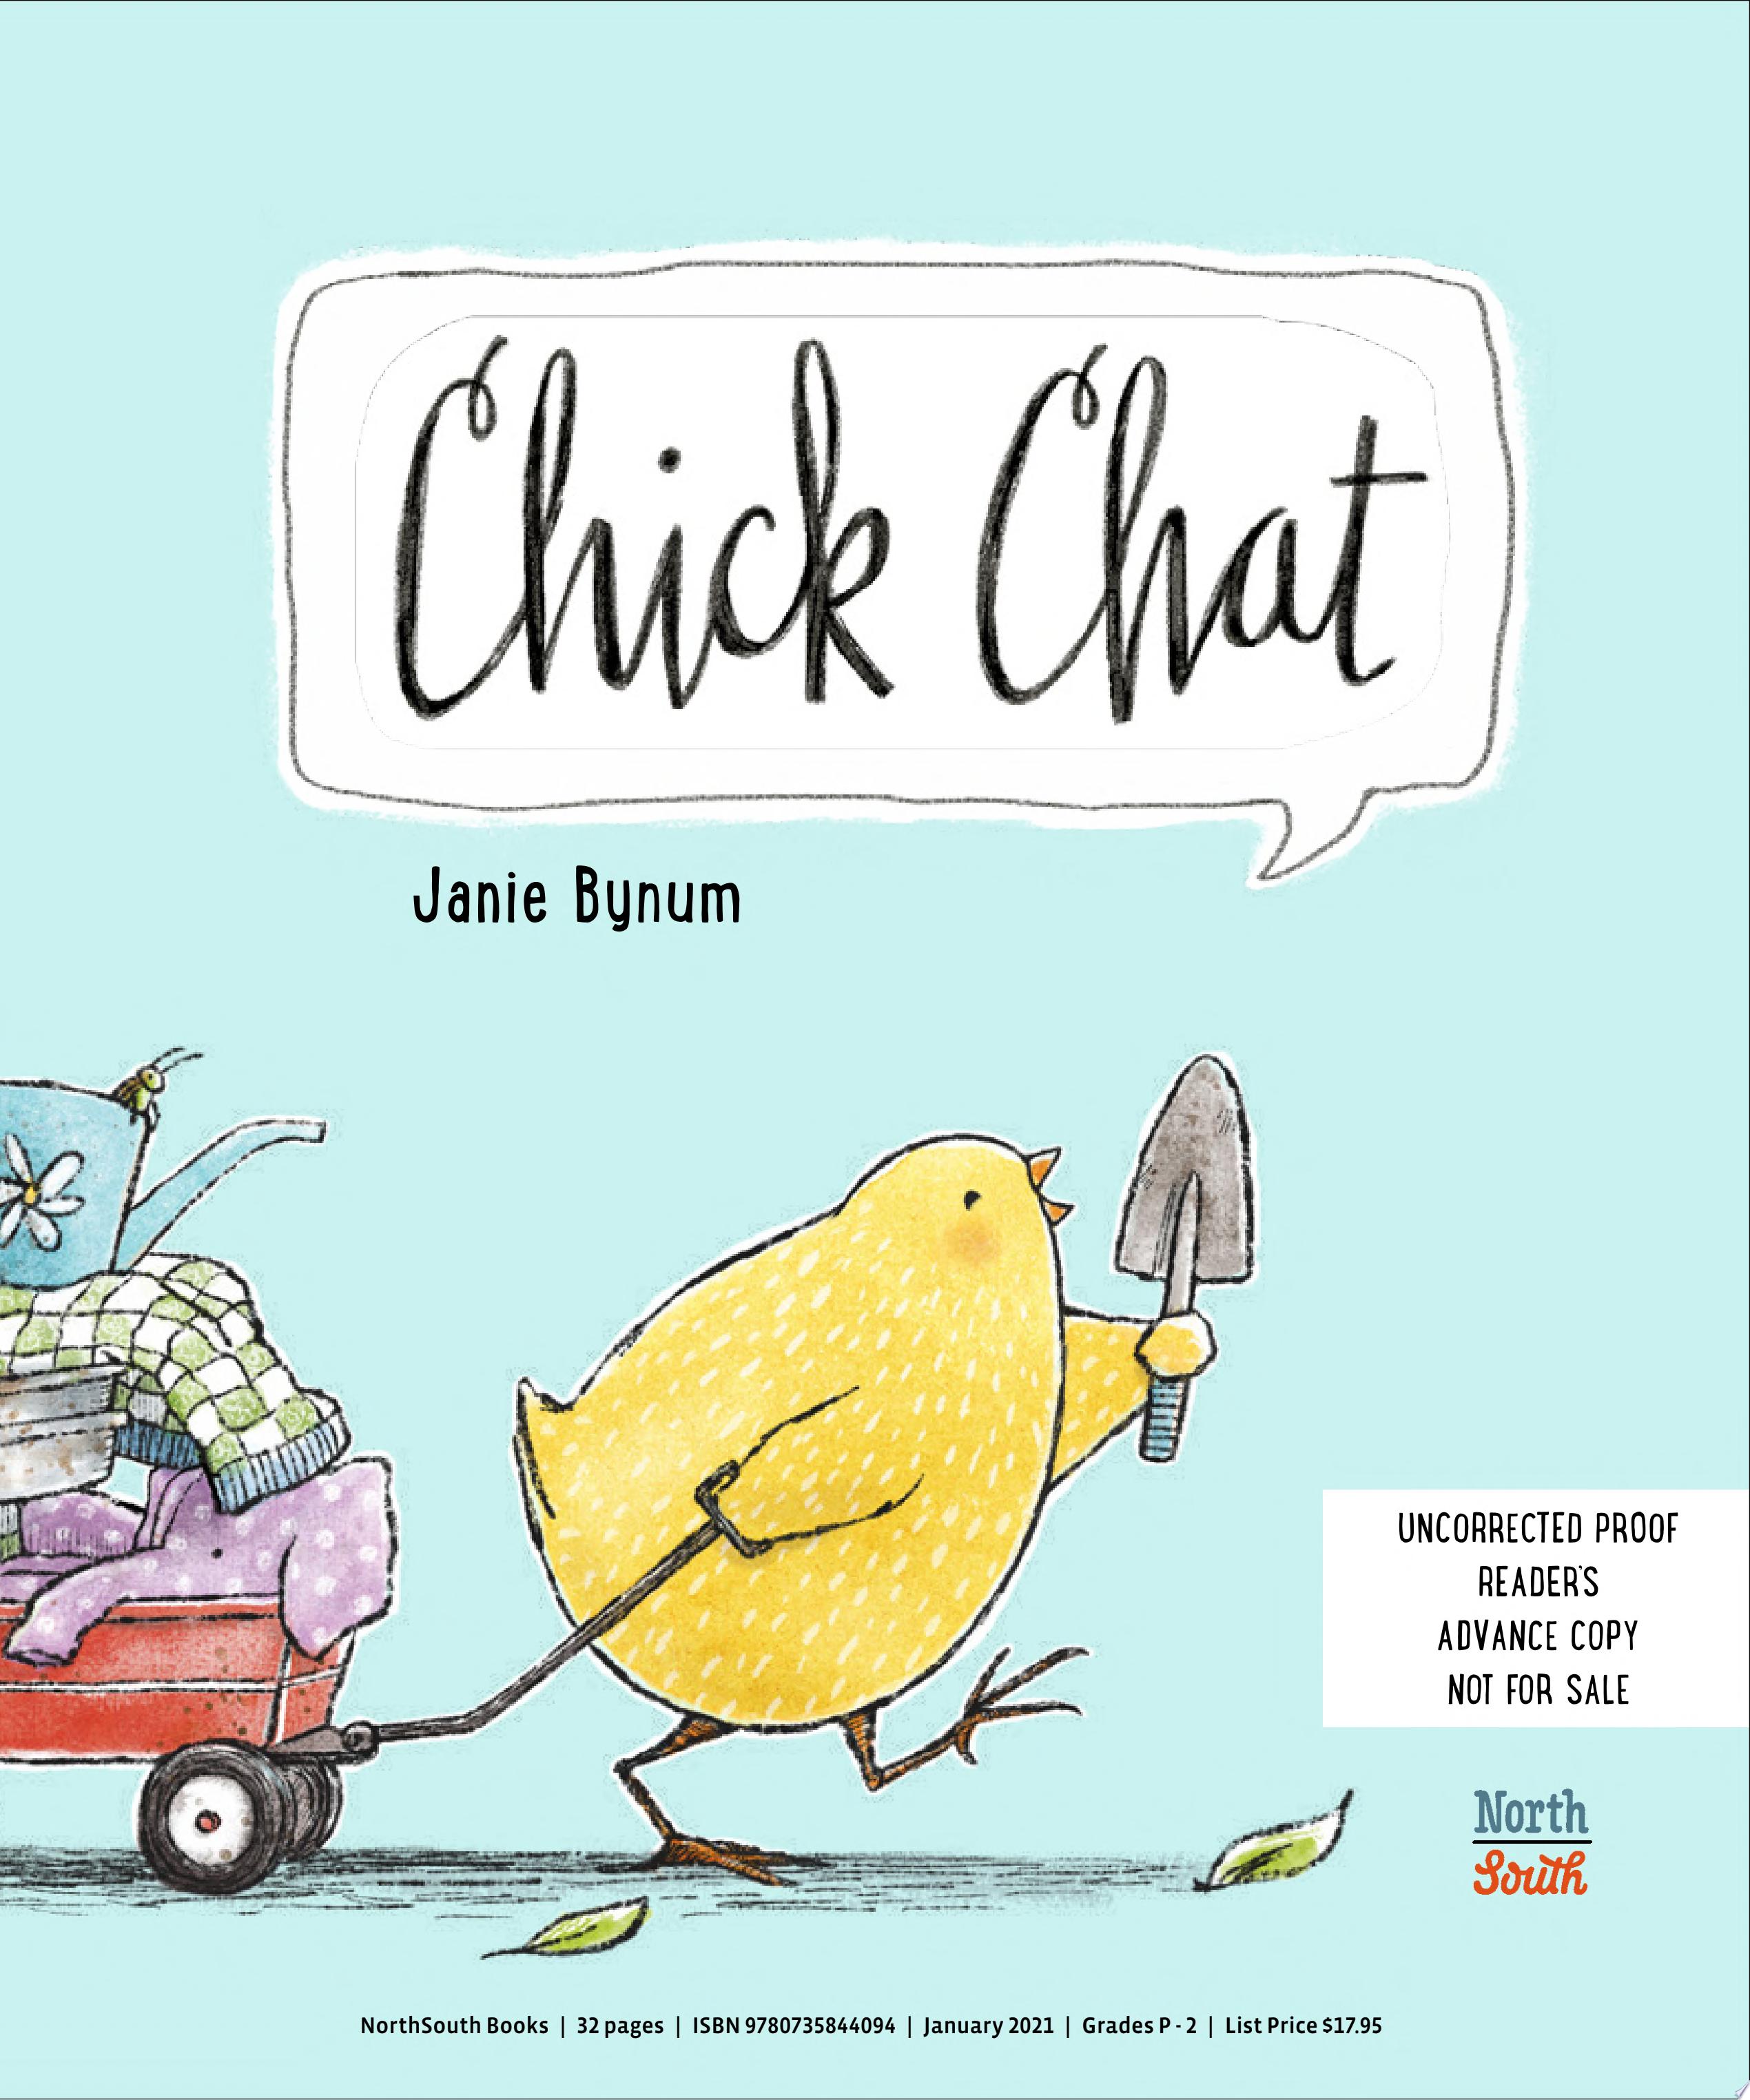 Image for "Chick Chat"